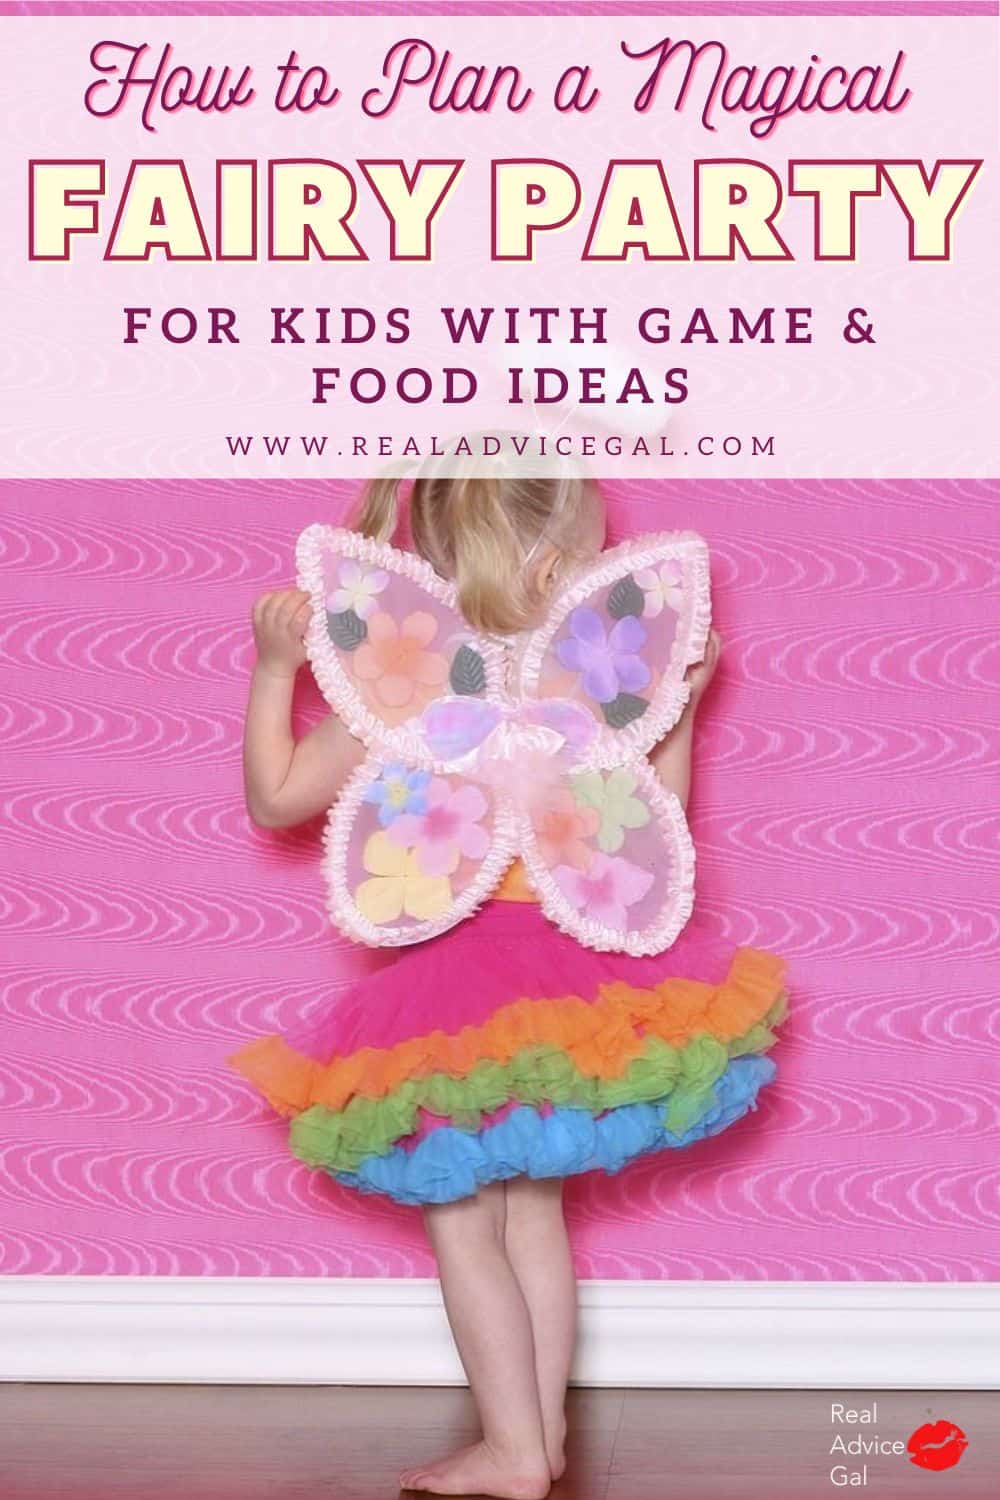 Tips for planning fairy themed party for kids